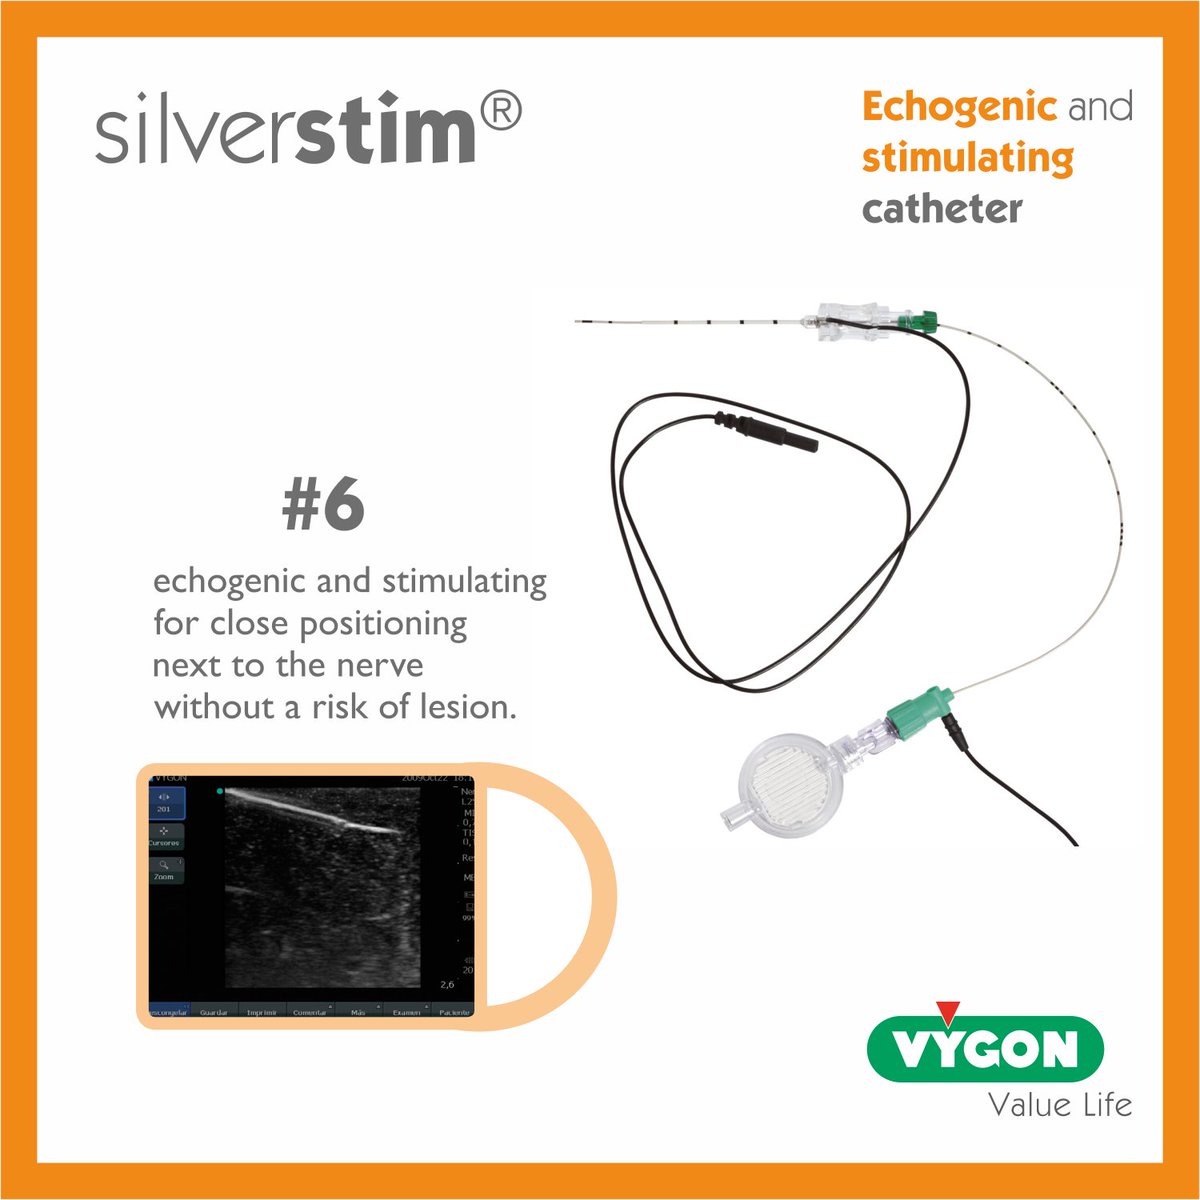 #Silverstim combines modern techniques to offer the most precise #catheter placement. The new thin silver layer coating on the whole length of the catheter ensures optimum conductivity and echogenicity, without reducing the internal diameter.

Learn more: https://t.co/lZWanwBde5 https://t.co/4wNfV82YtV